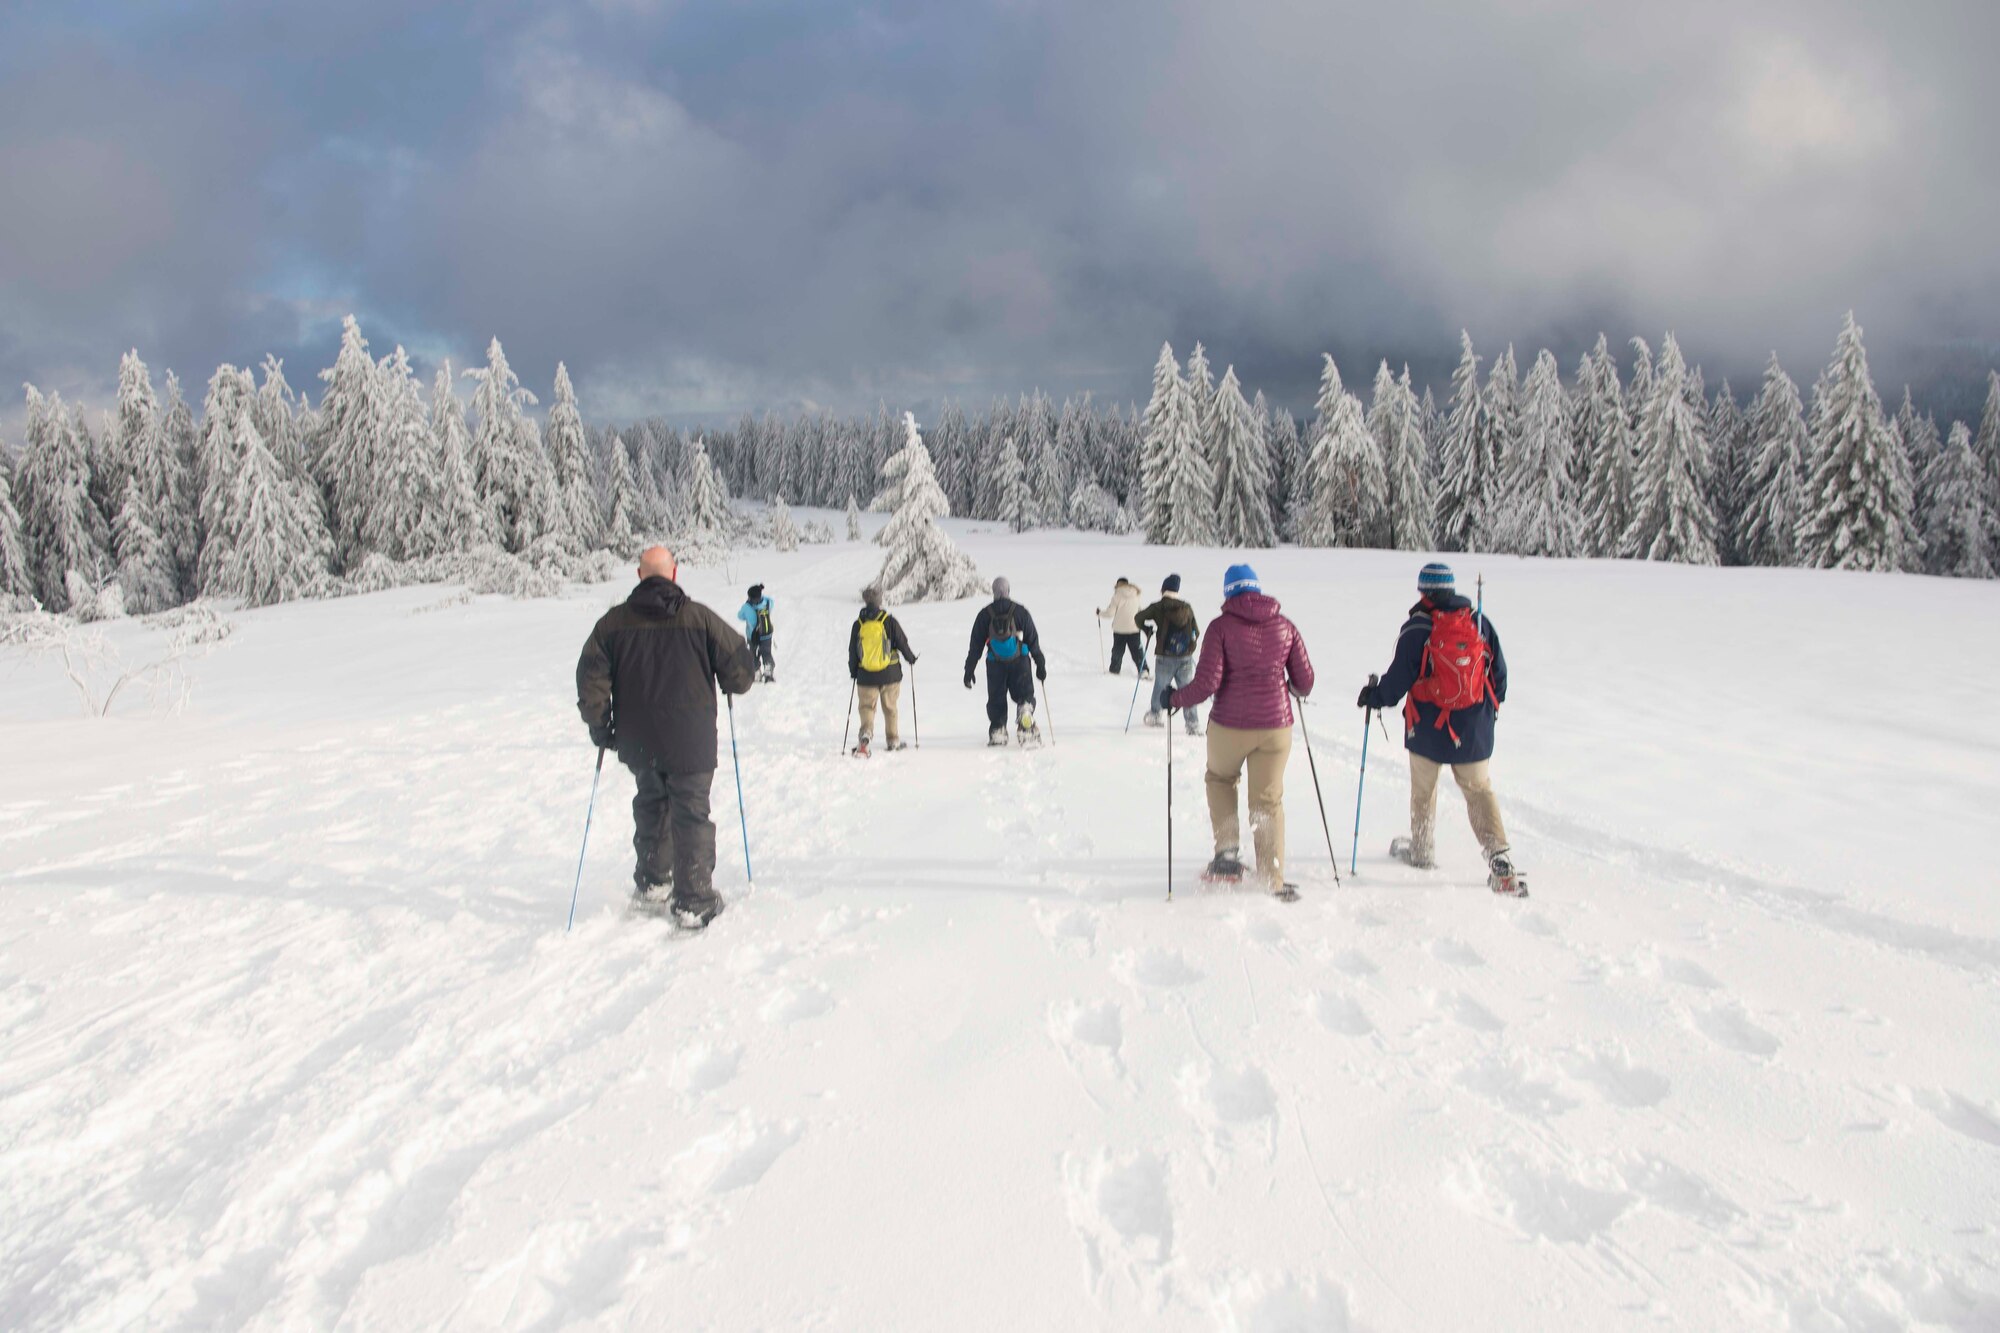 Team Ramstein members snowshoe to the top of a mountain in the Black Forest, Sasbachwalden, Germany, Jan. 21, 2018. The 86th FSS ODR plans to offer more snowshoe hikes in February, along with other opportunities such as a kayak skills clinic and rock climbing. (U.S. Air Force photo by Senior Airman Elizabeth Baker)